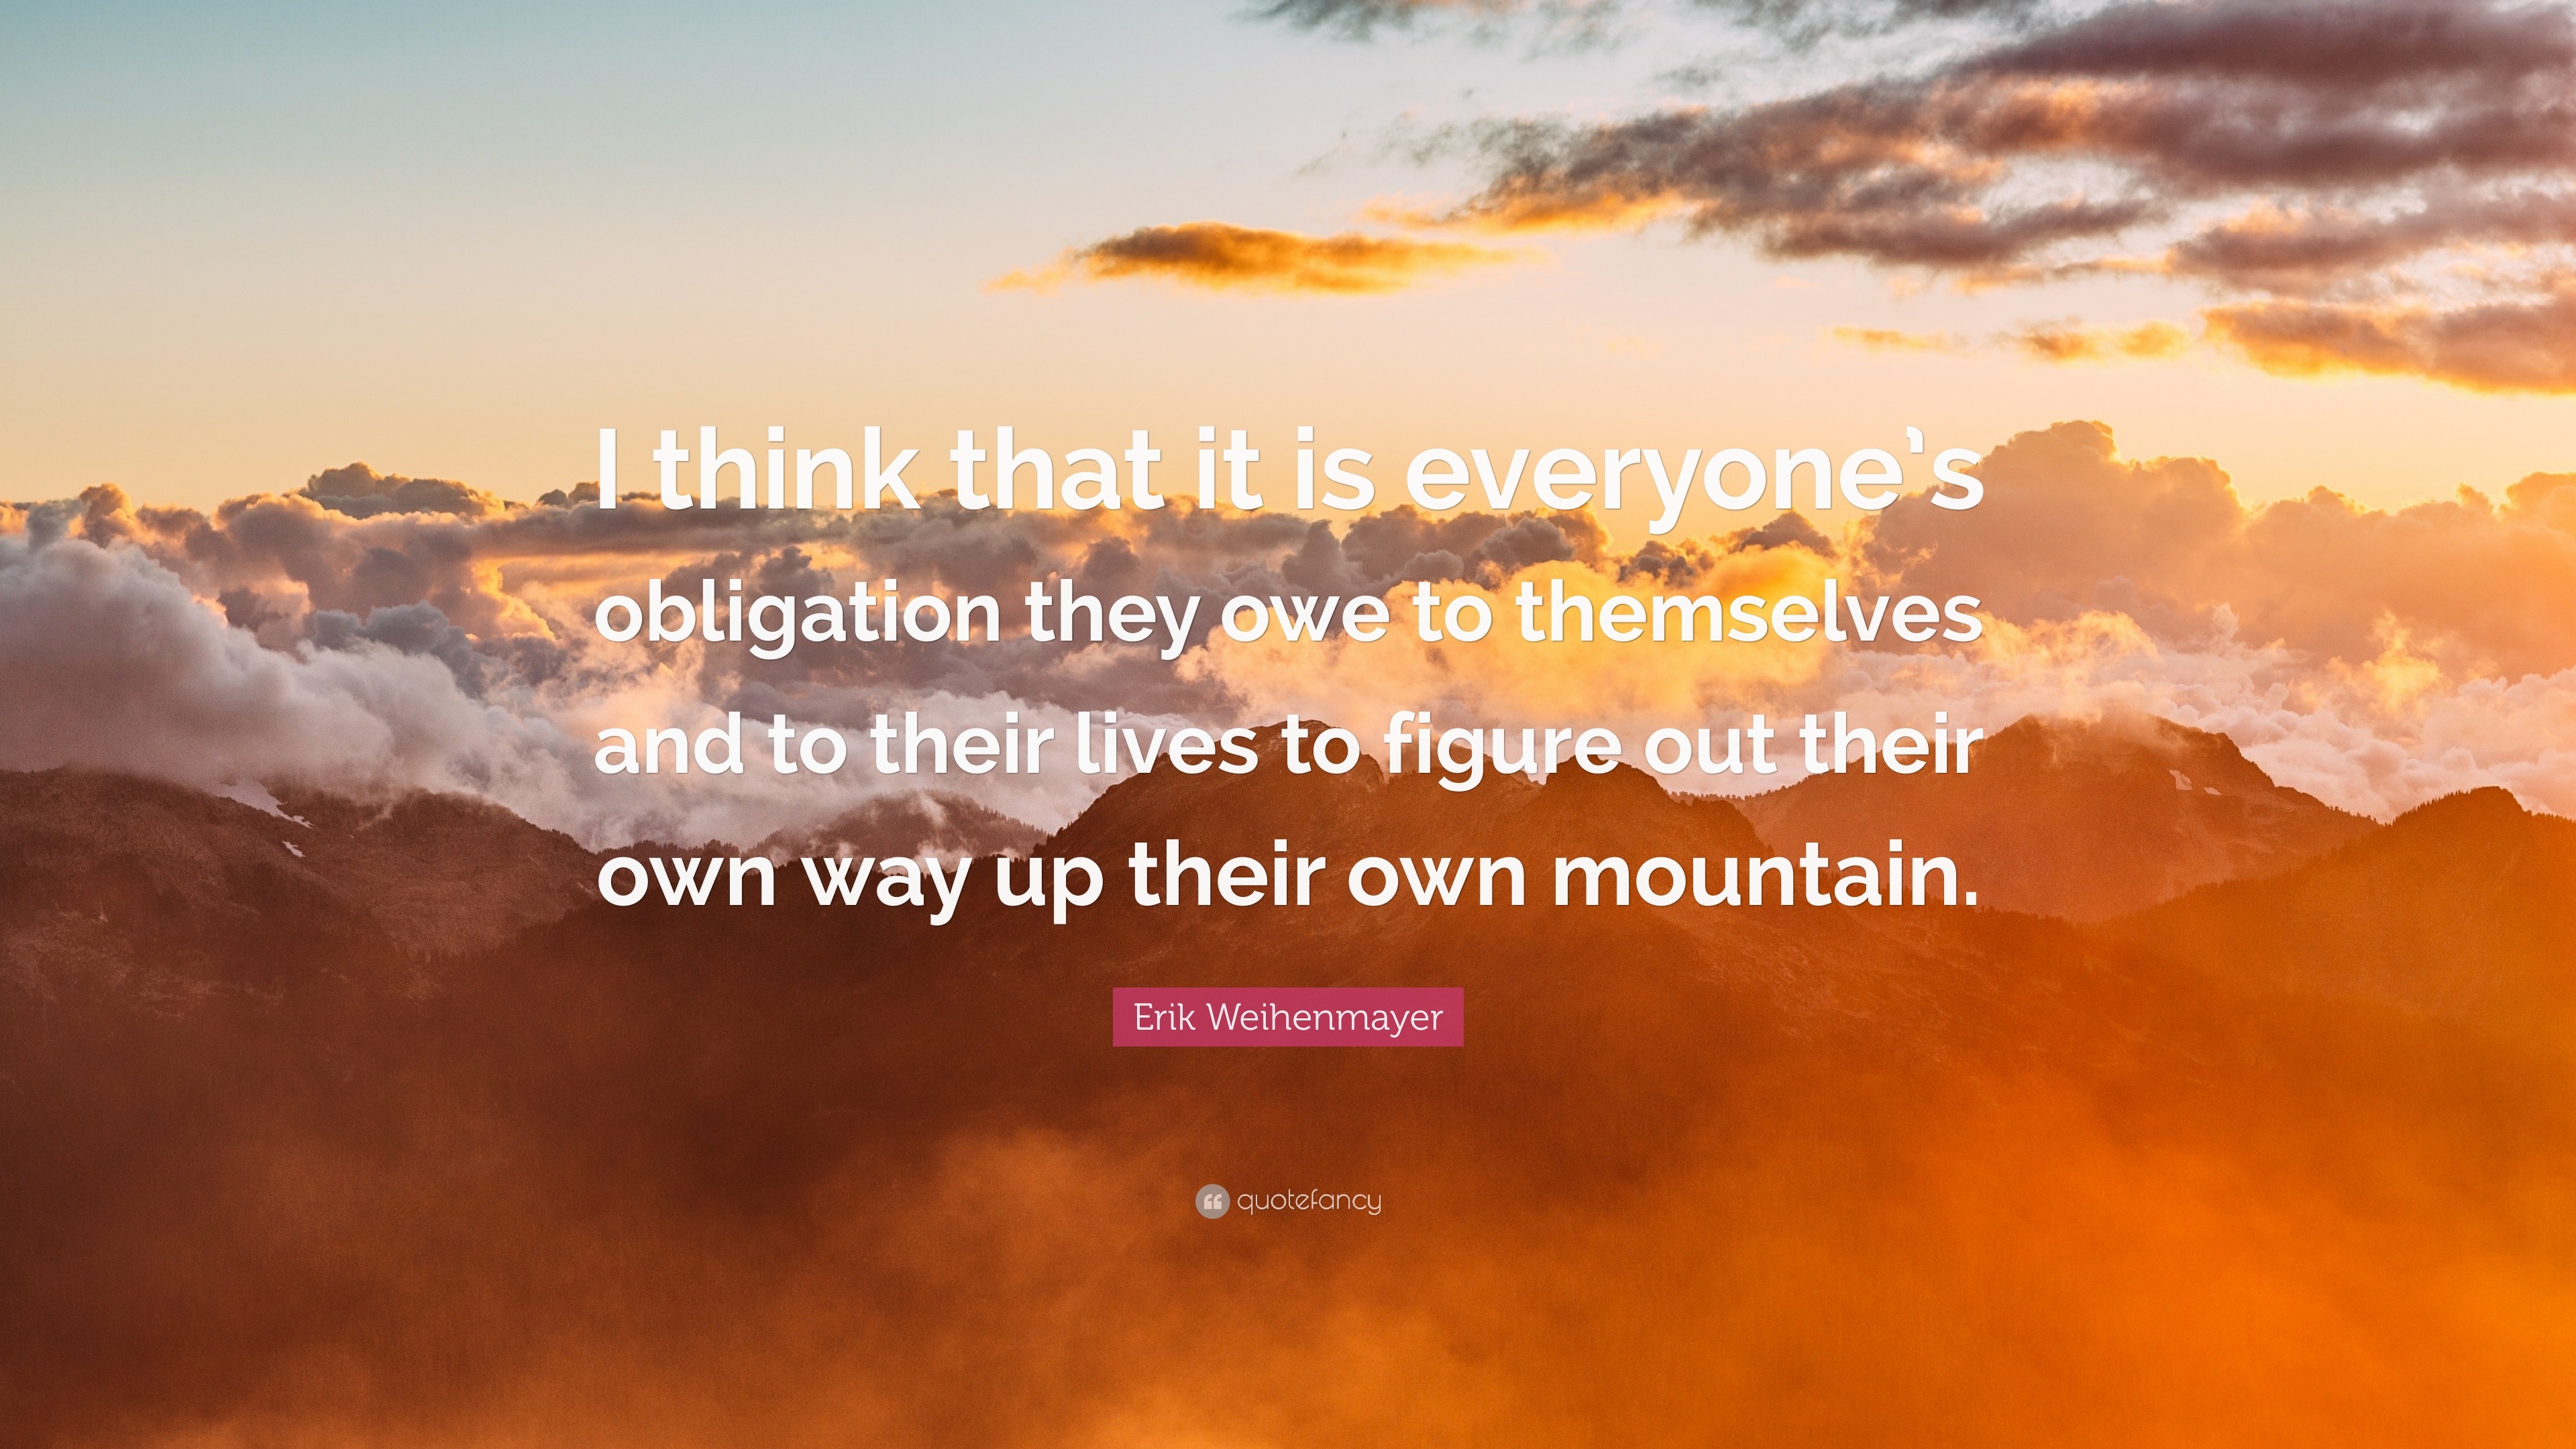 Erik Weihenmayer Quote: “I think that it is everyone’s obligation they ...